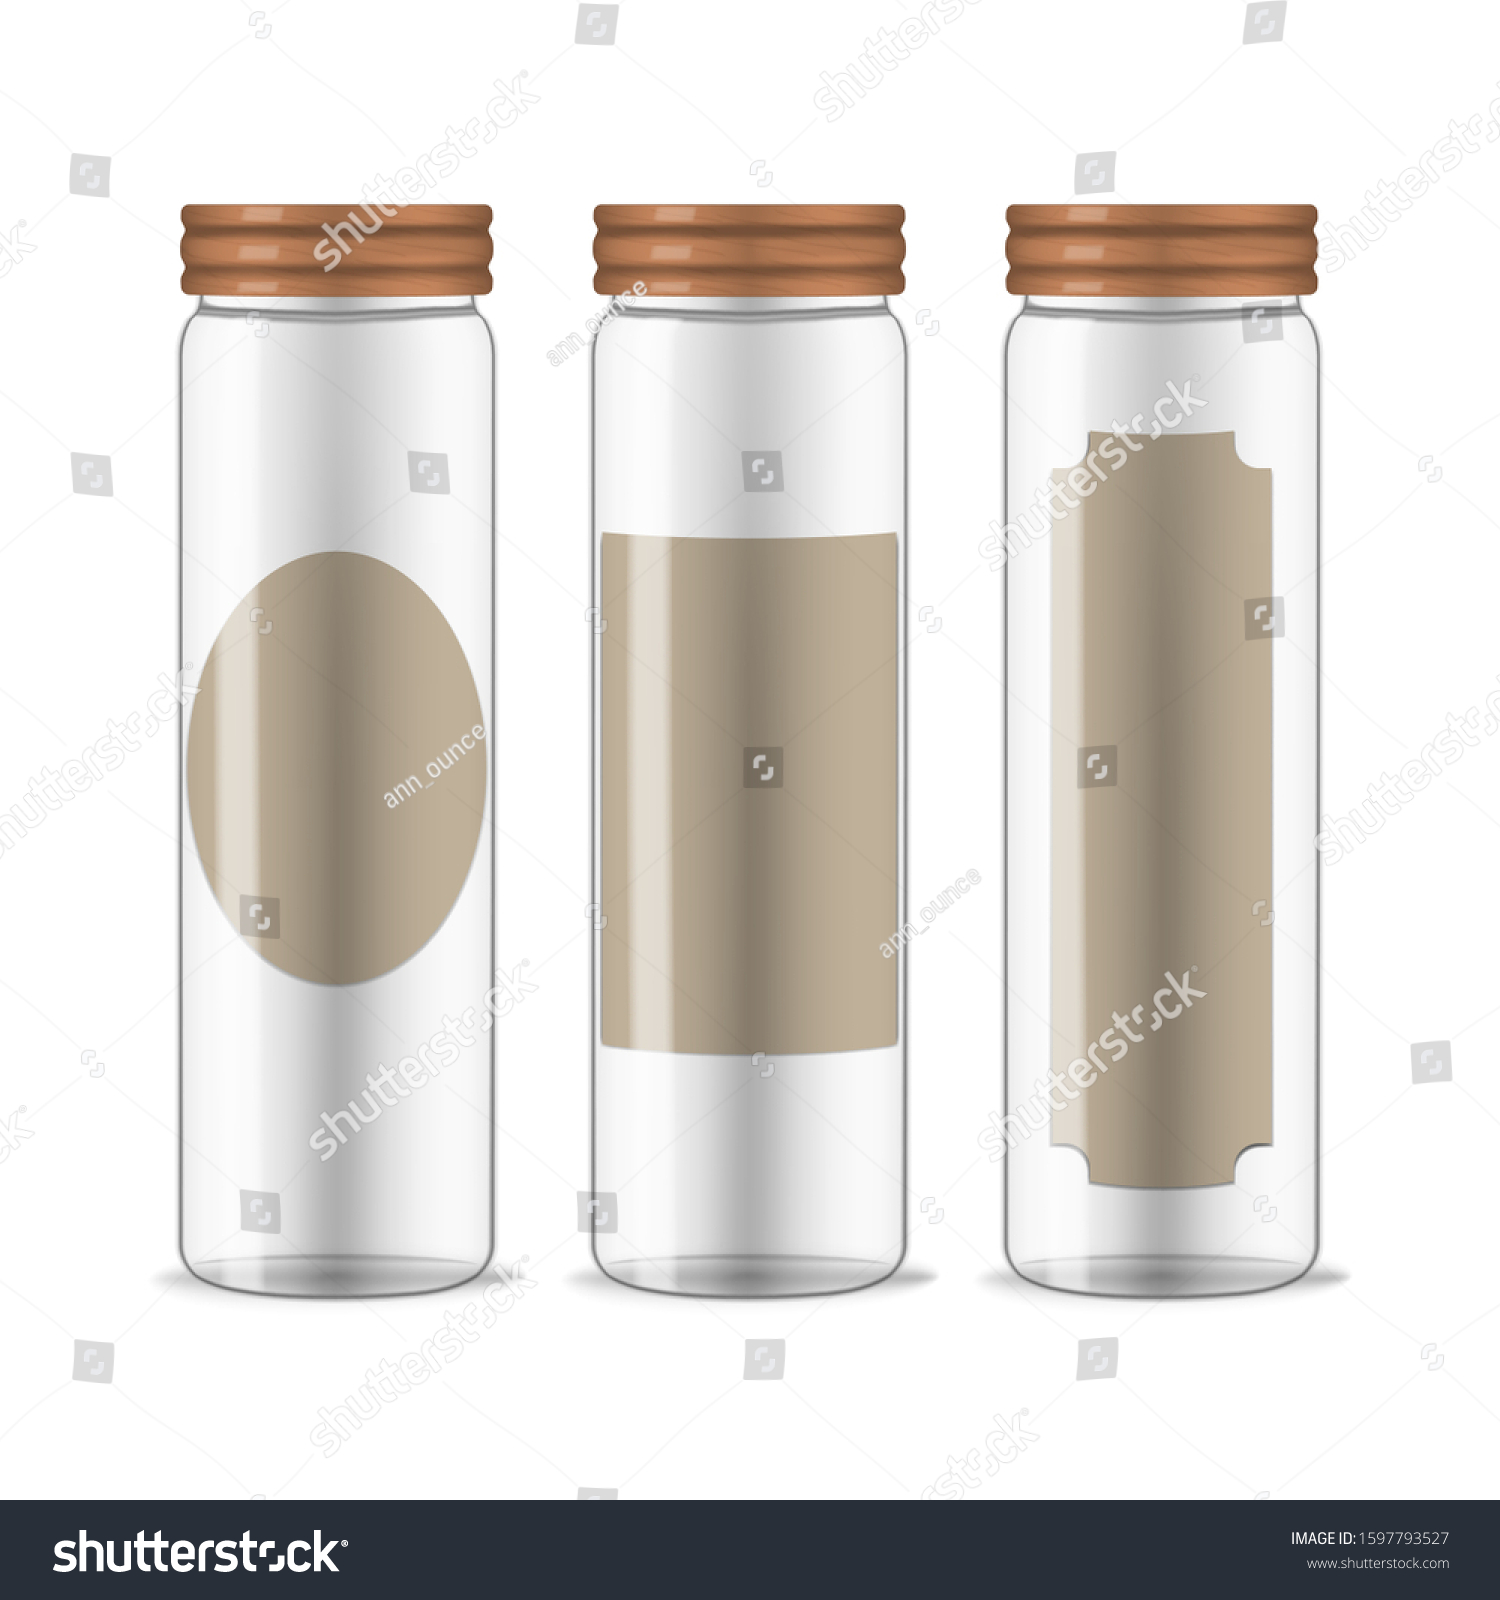 Download Clear Glass Jars Screw Wooden Lids Stock Vector Royalty Free 1597793527